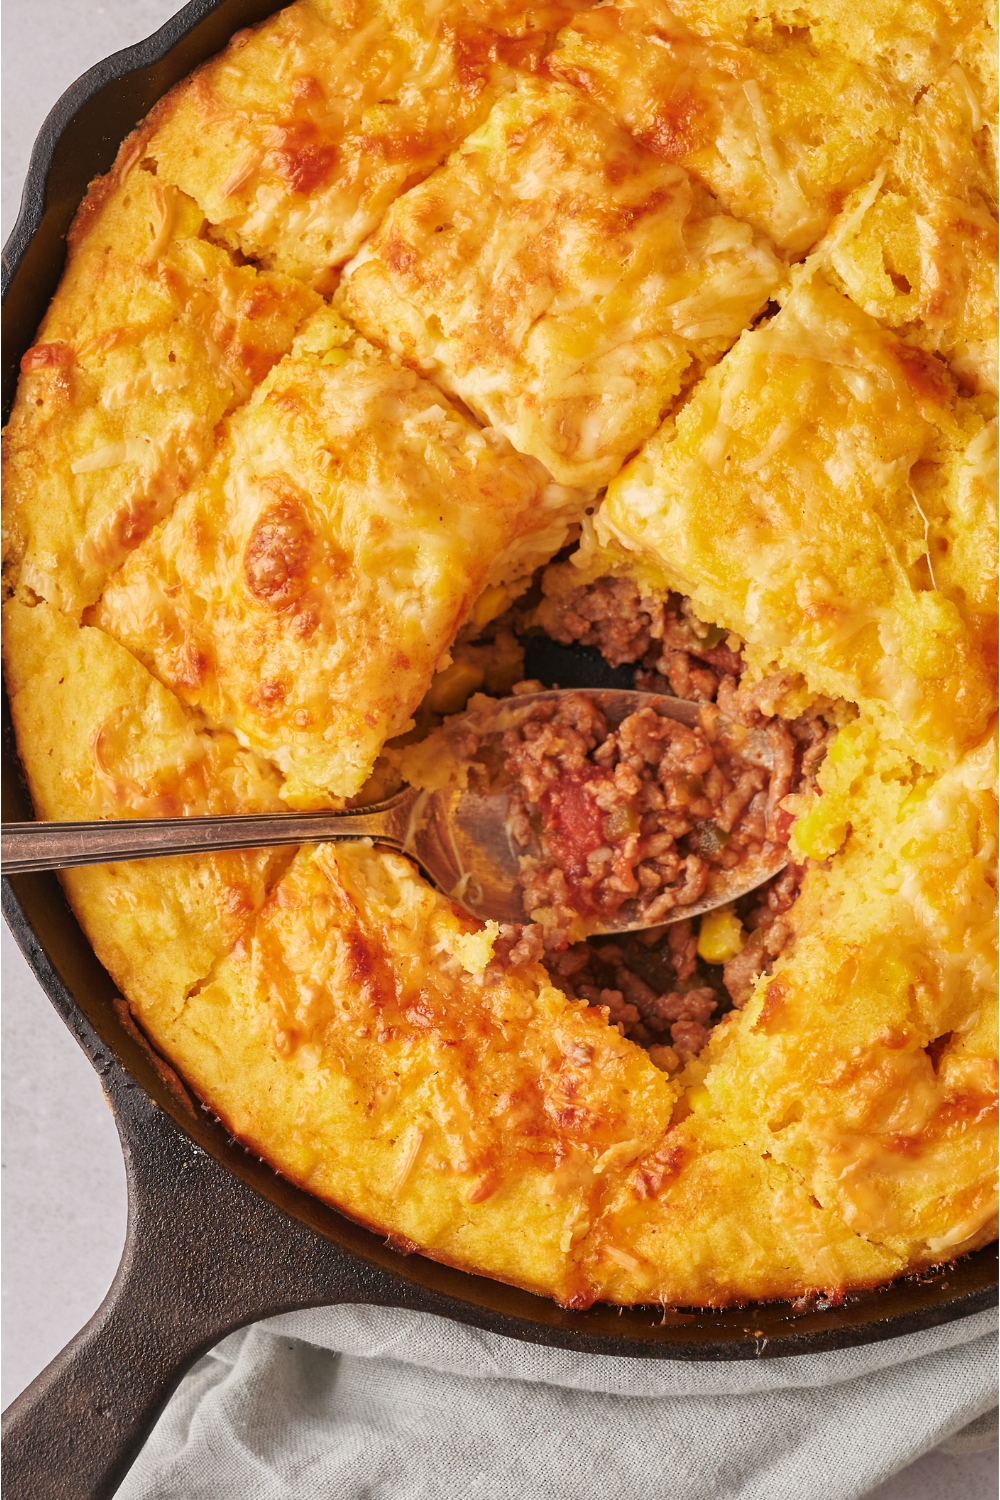 Part of a cast iron skillet with mexican cornbread casserole in it. One slice is missing and there is a spoon in it with ground beef.